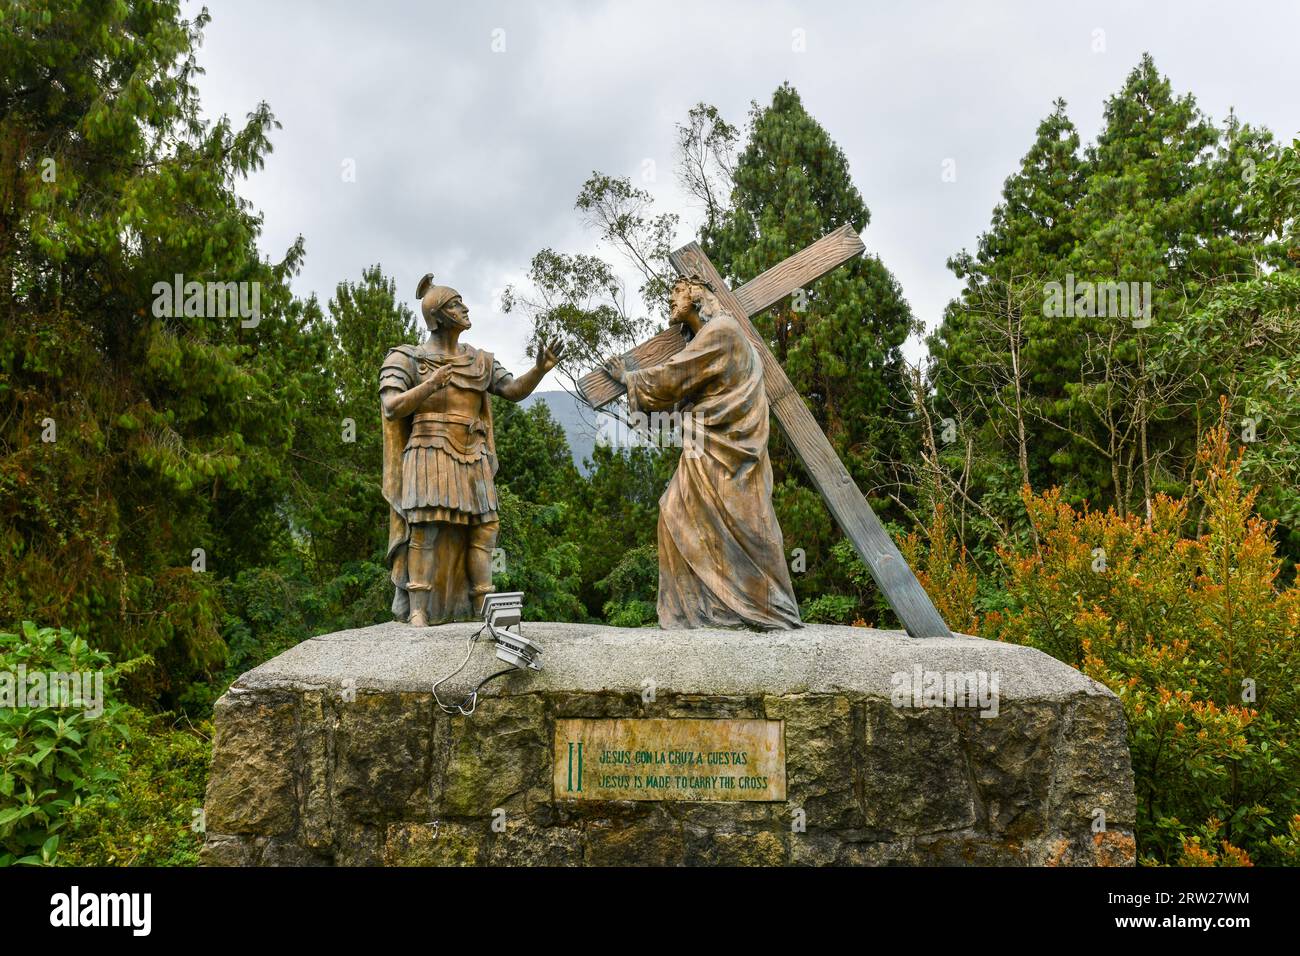 Statue of Jesus at Montserrat Stations of the Cross in Monserrate, Colombia Stock Photo